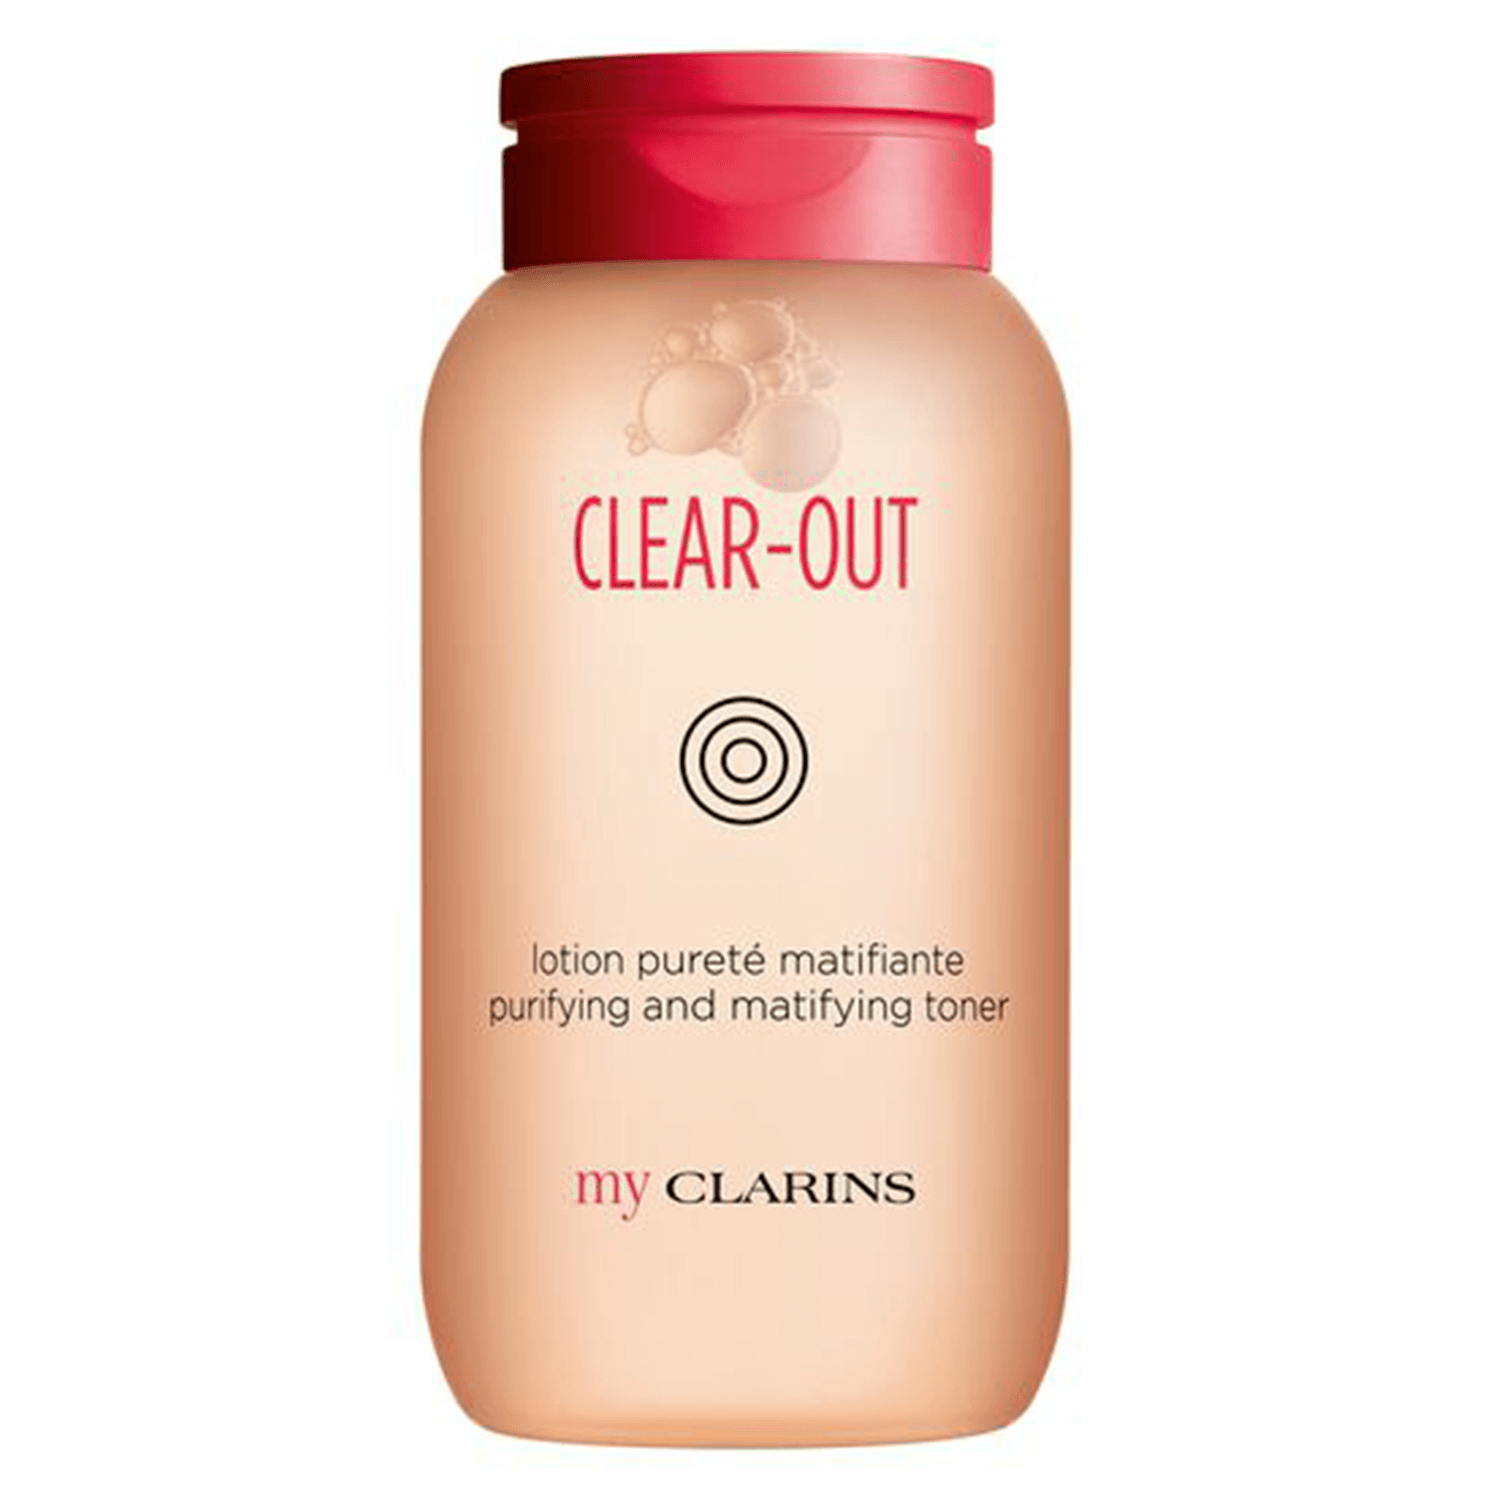 Produktbild von myCLARINS - CLEAR-OUT Purifying Matifying Lotion